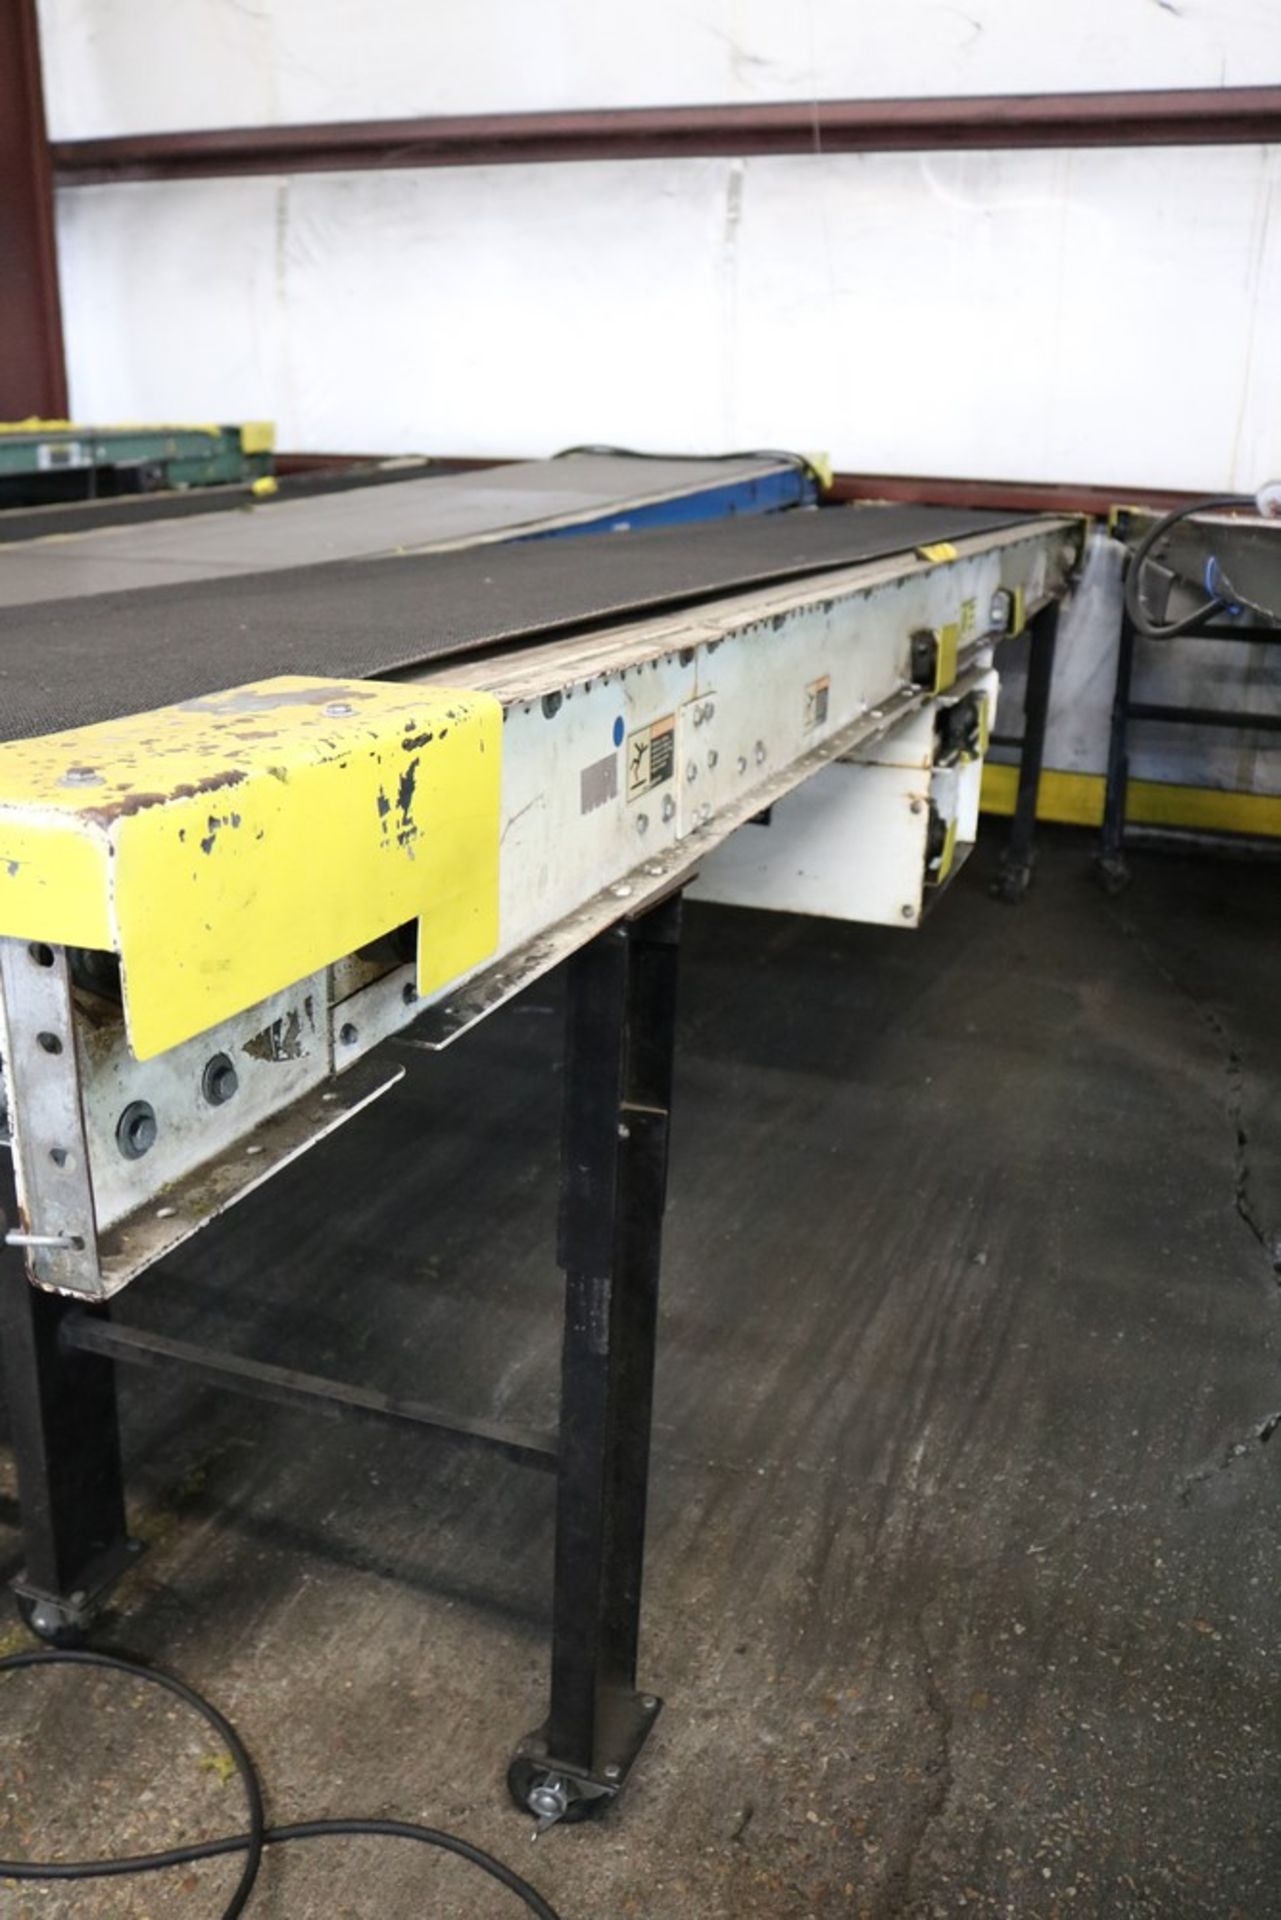 Automated Conveyor Systems, 16' x 24" Electric Parts Conveyor - Image 3 of 6